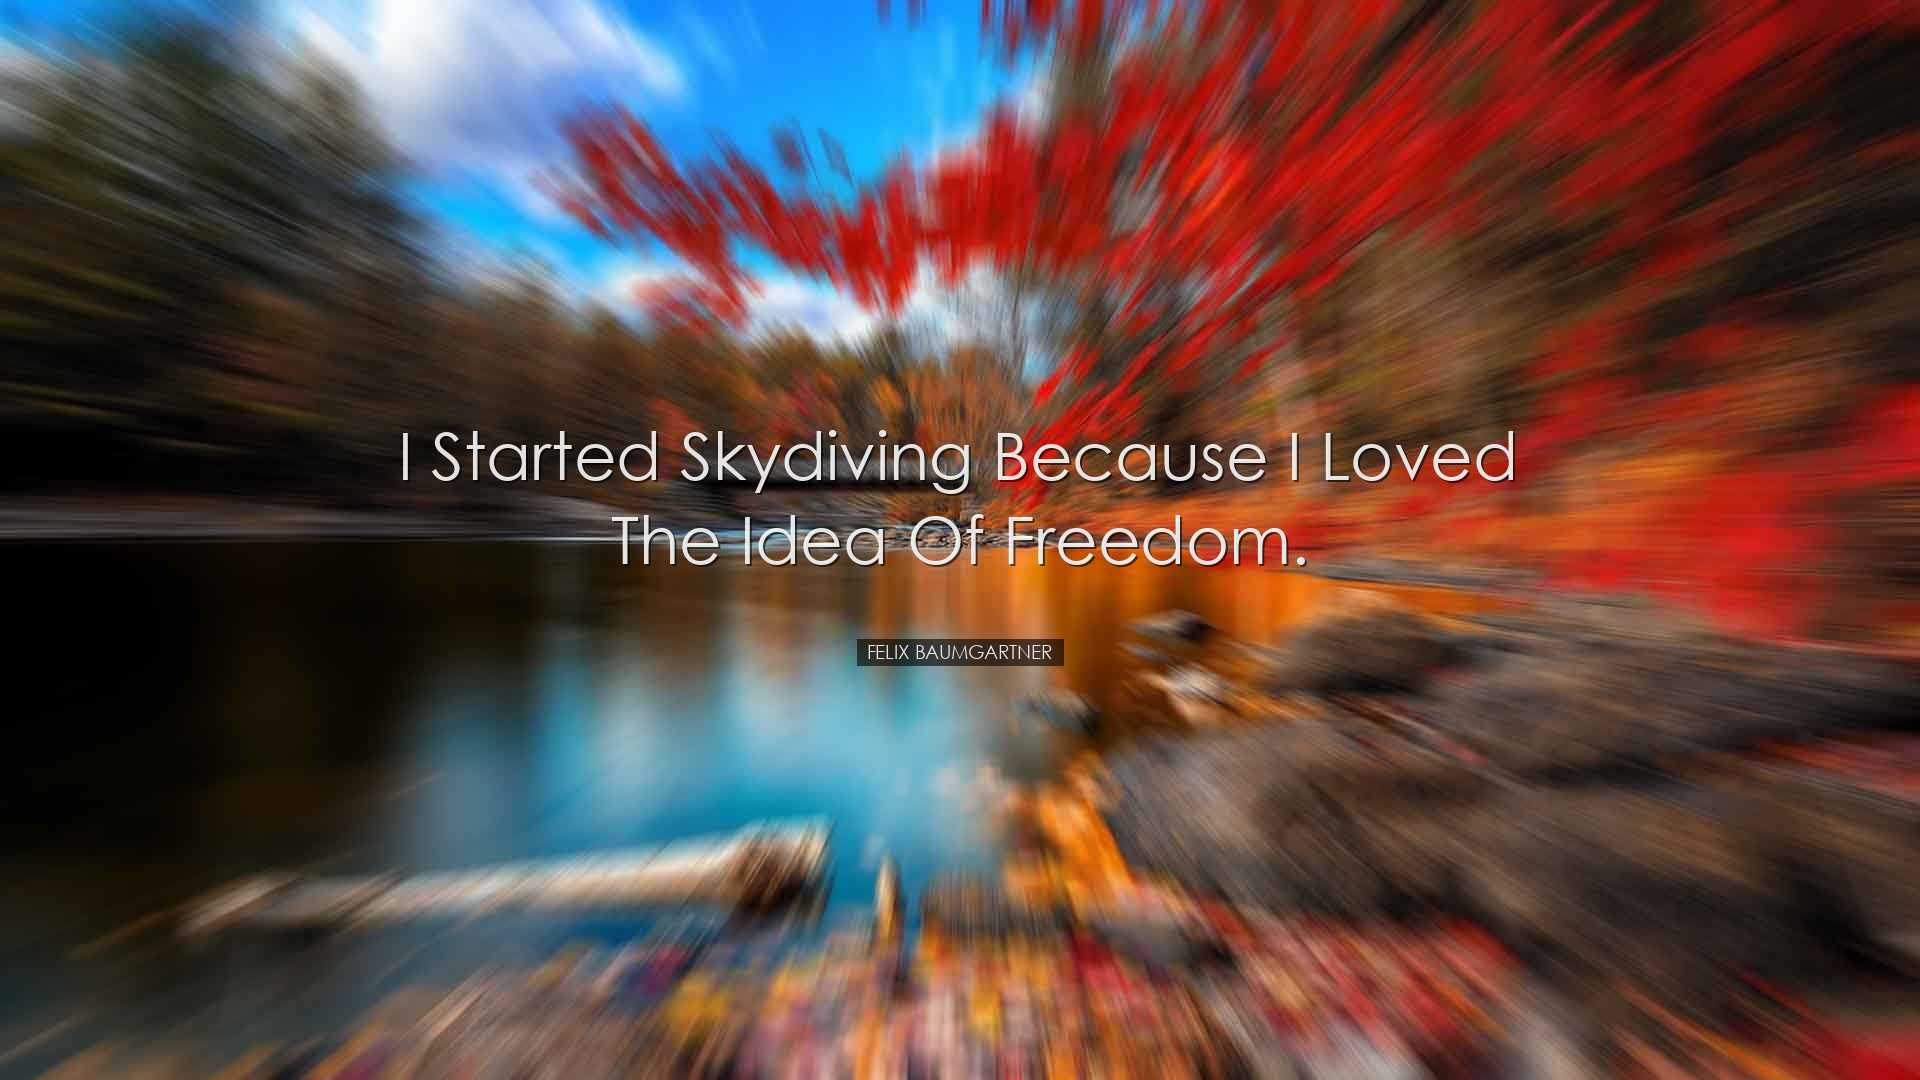 I started skydiving because I loved the idea of freedom. - Felix B